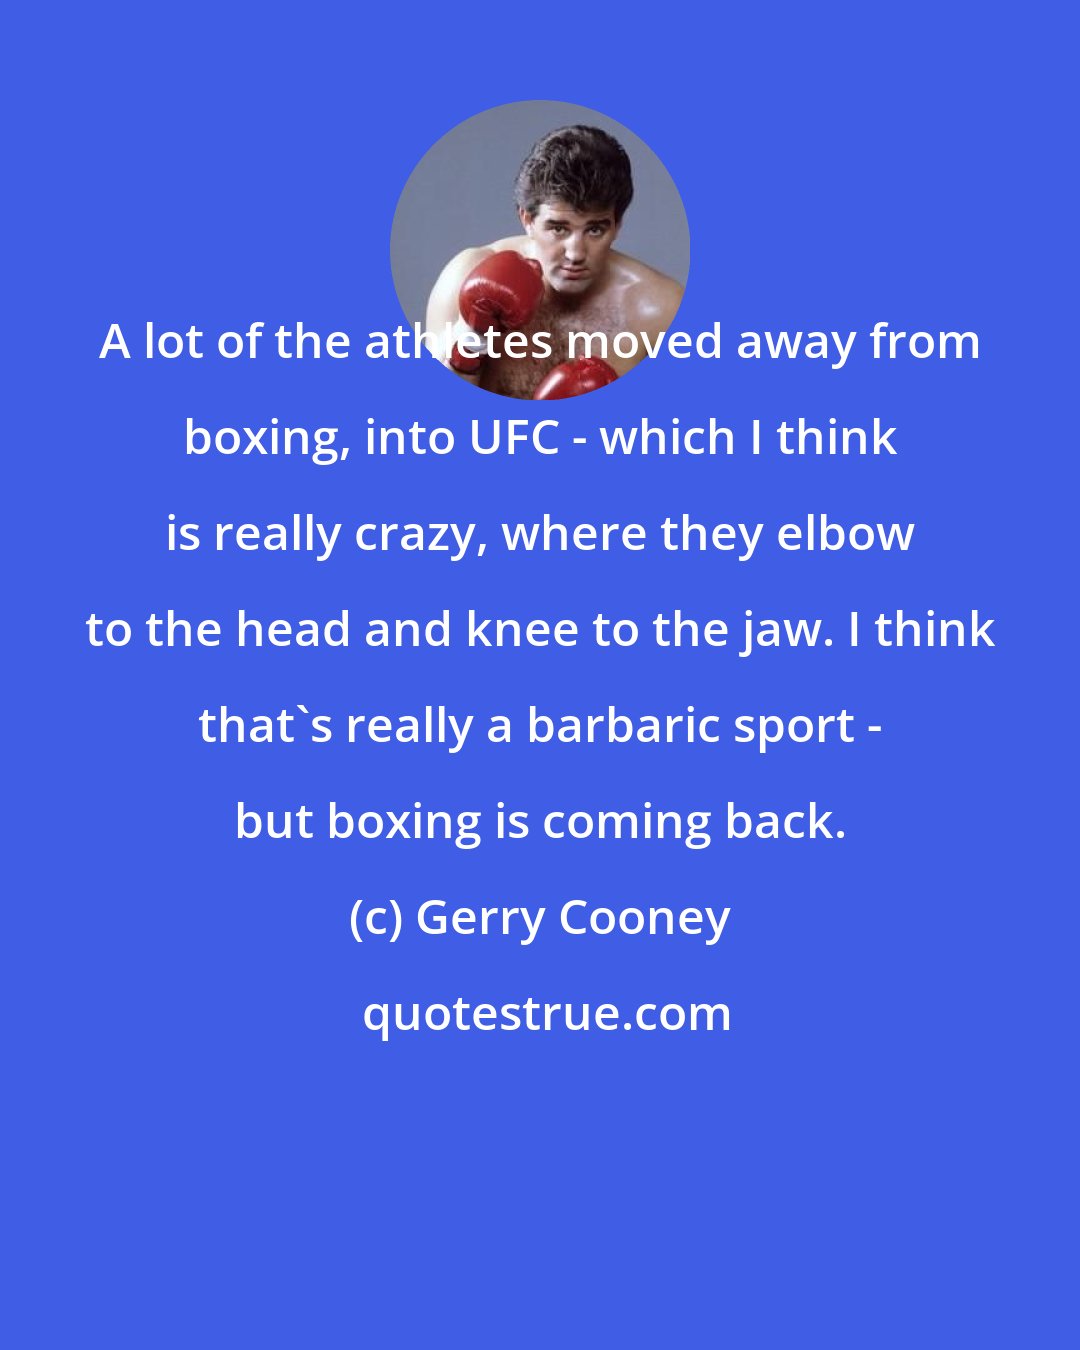 Gerry Cooney: A lot of the athletes moved away from boxing, into UFC - which I think is really crazy, where they elbow to the head and knee to the jaw. I think that's really a barbaric sport - but boxing is coming back.